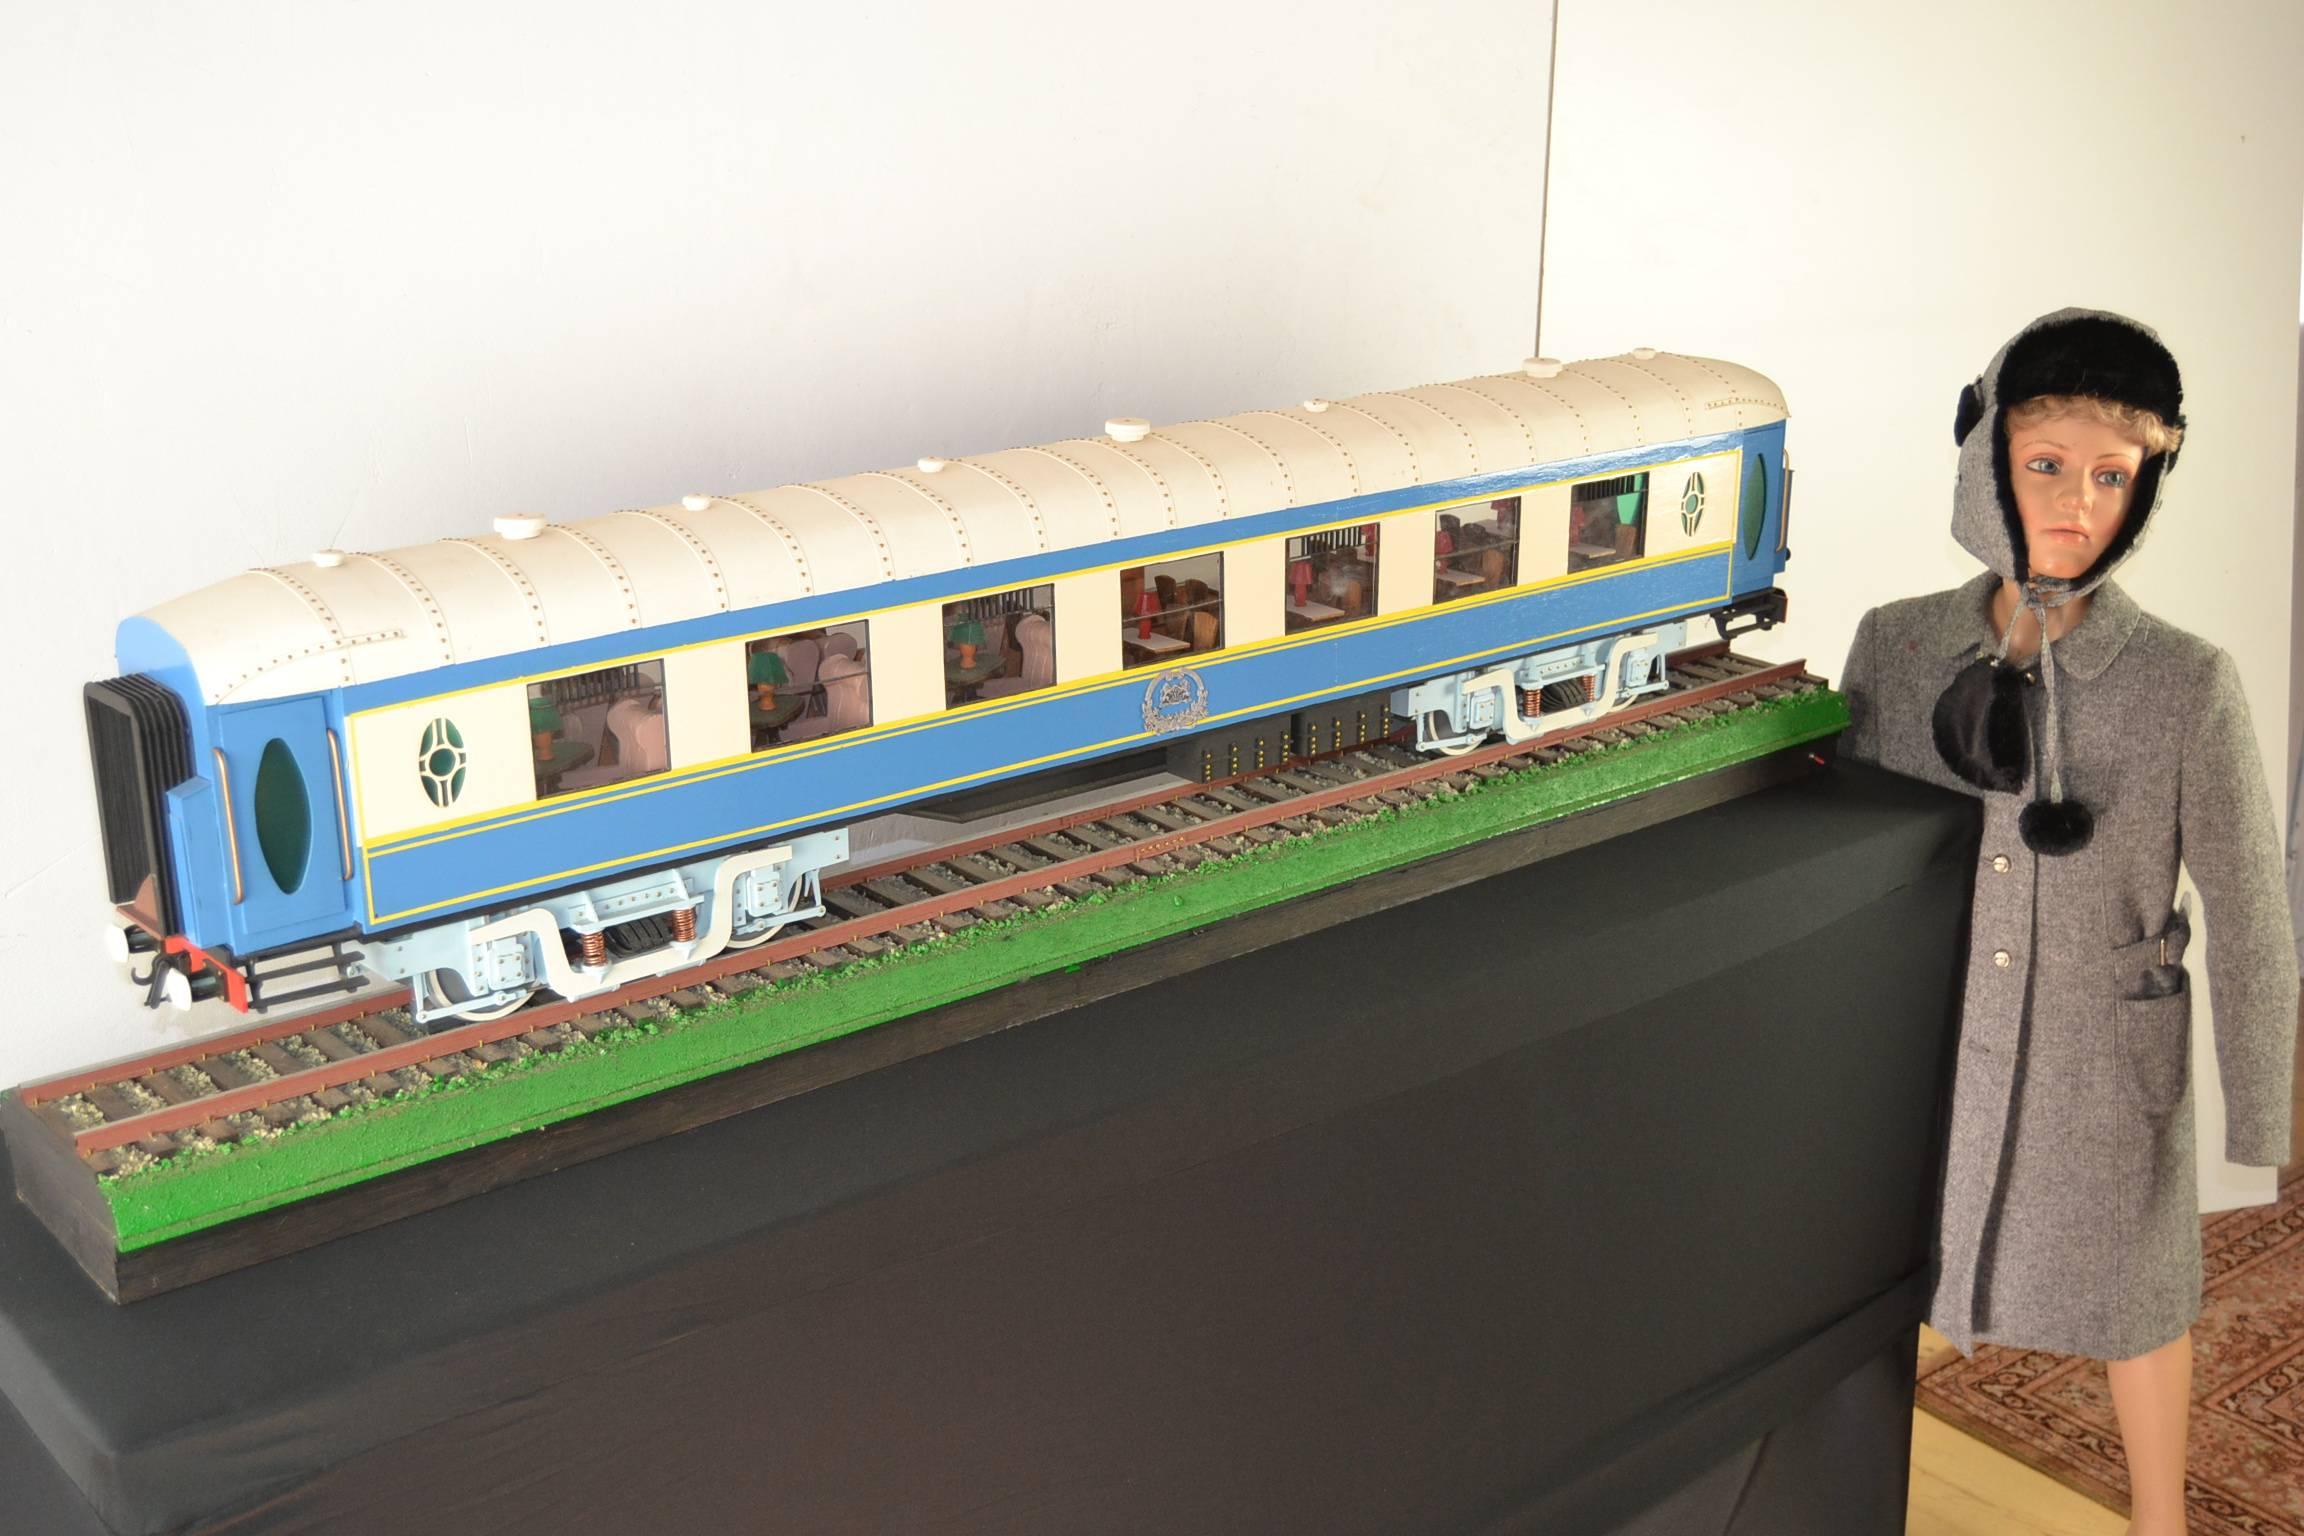 Large  model  of the Orient Express Luxury Train : 66.92 inch x 170 cm  ! 
Known as the hotel on wheels.
This large-scale model is very detailed and also lights inside. 
It was made by a French passionate train lover many years ago.
Pictures speak